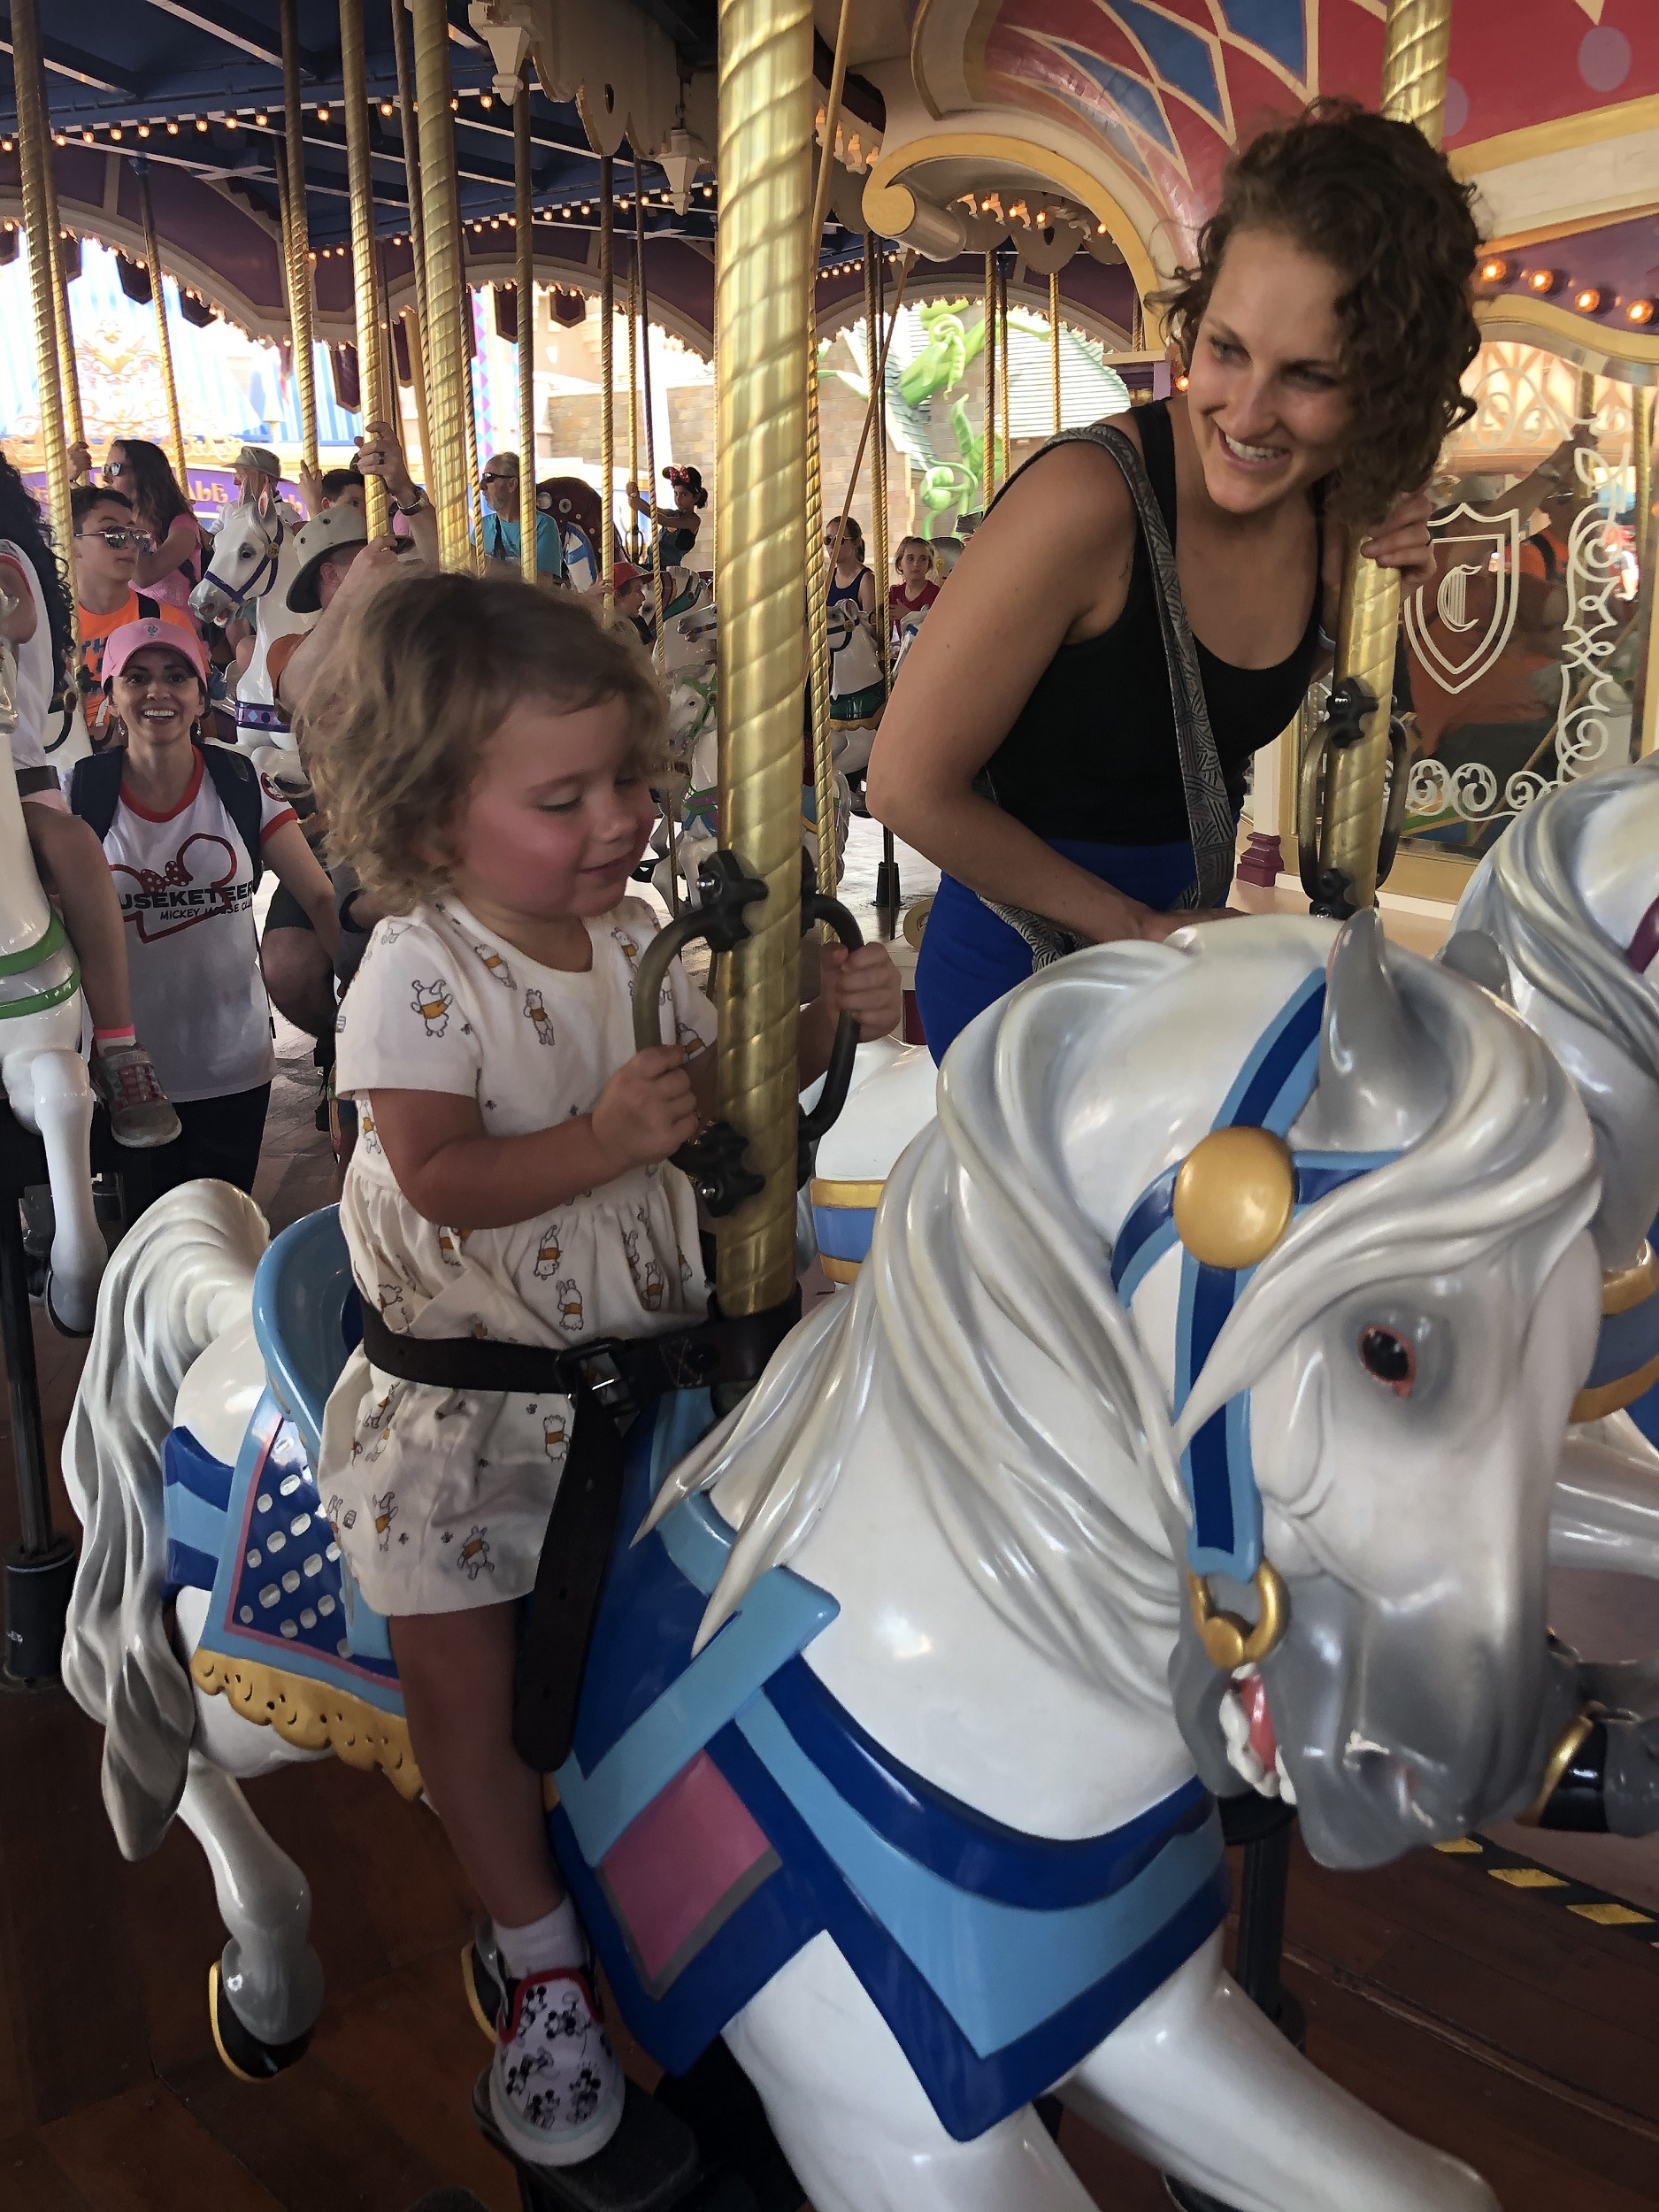 A toddler rides the carousel in Disney World.